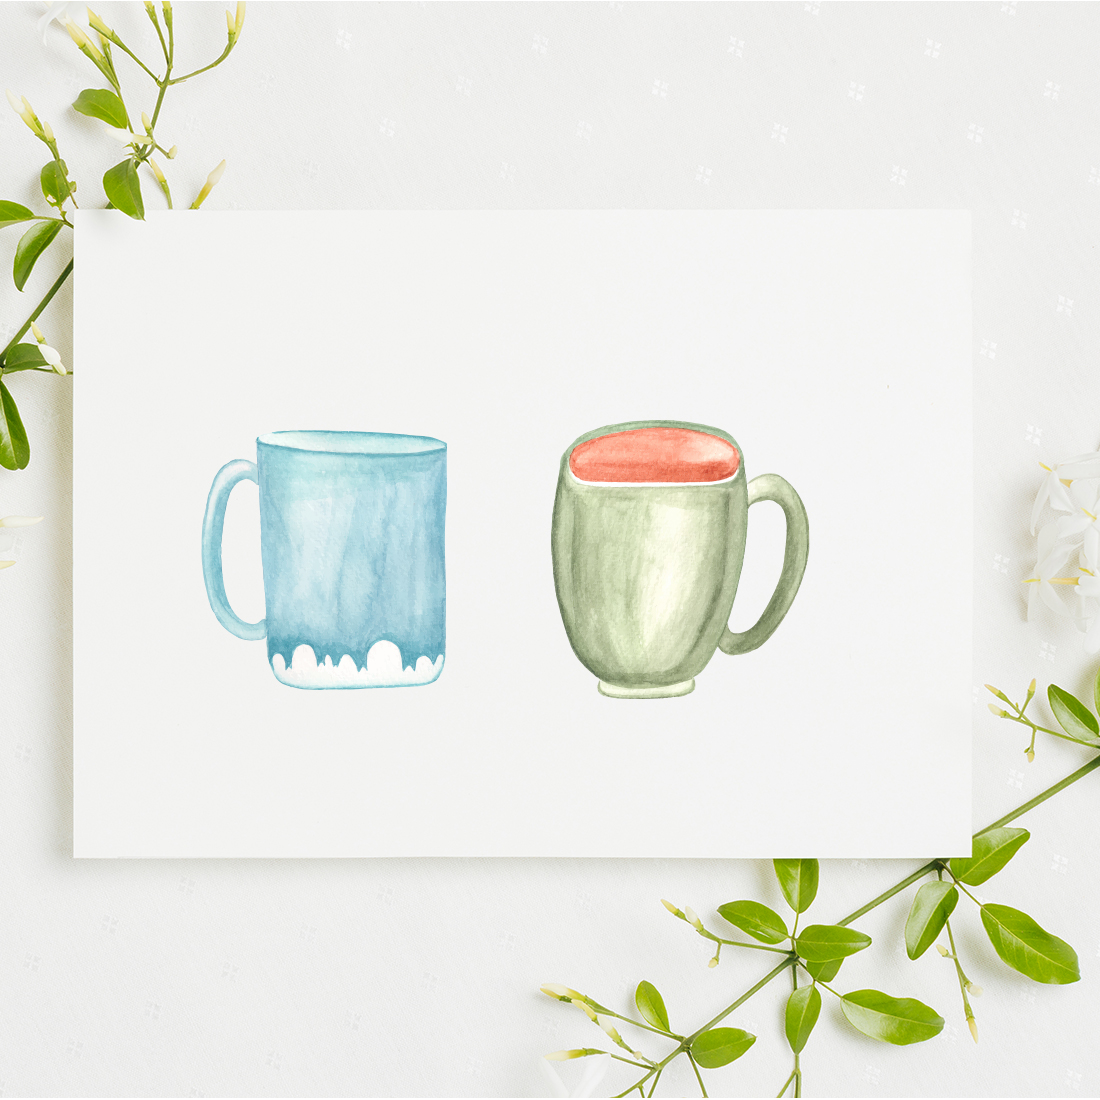 White paper with two watercolor cups.